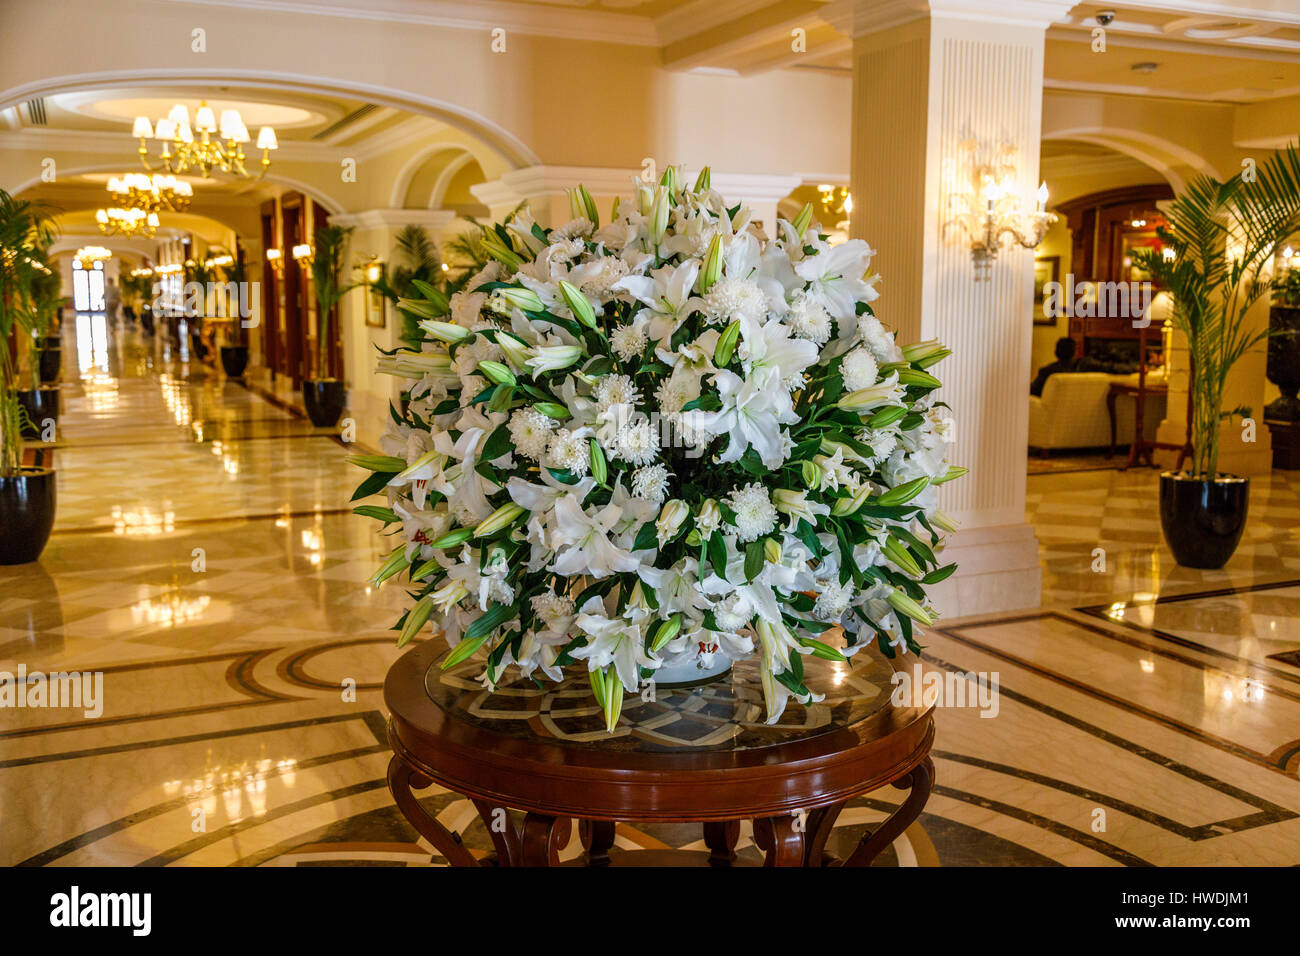 Flower Arrangement India High Resolution Stock Photography And Images Alamy